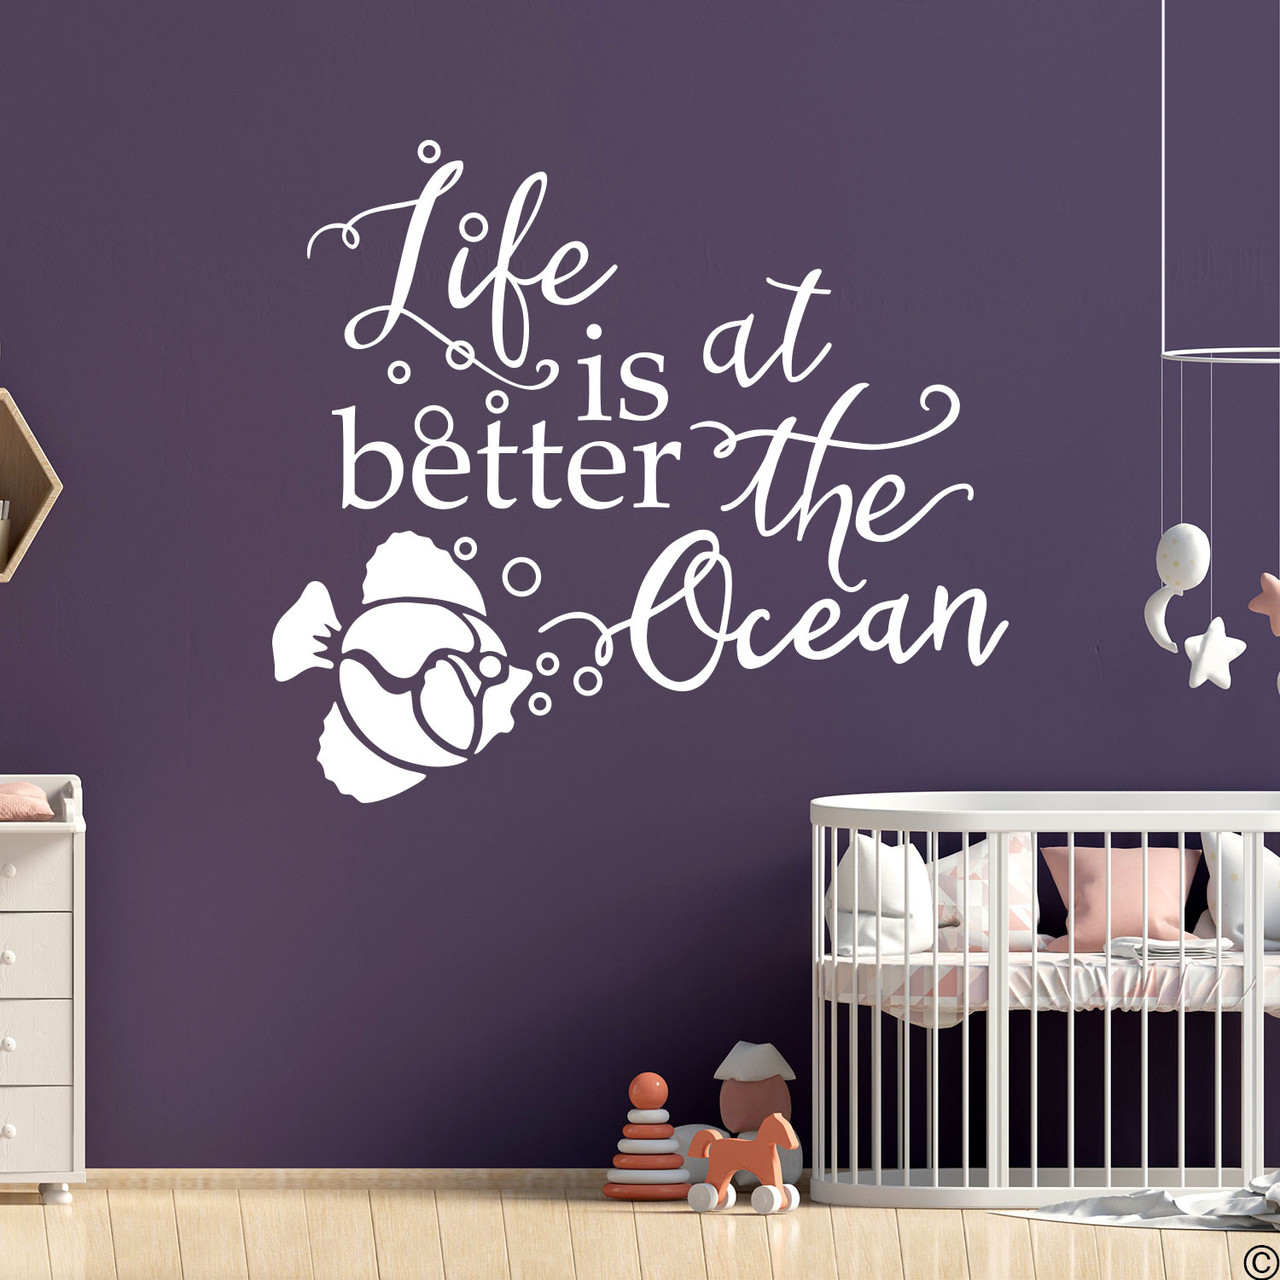 Fish wall decal with "Life is better at the Ocean," quote. Shown here in white color.